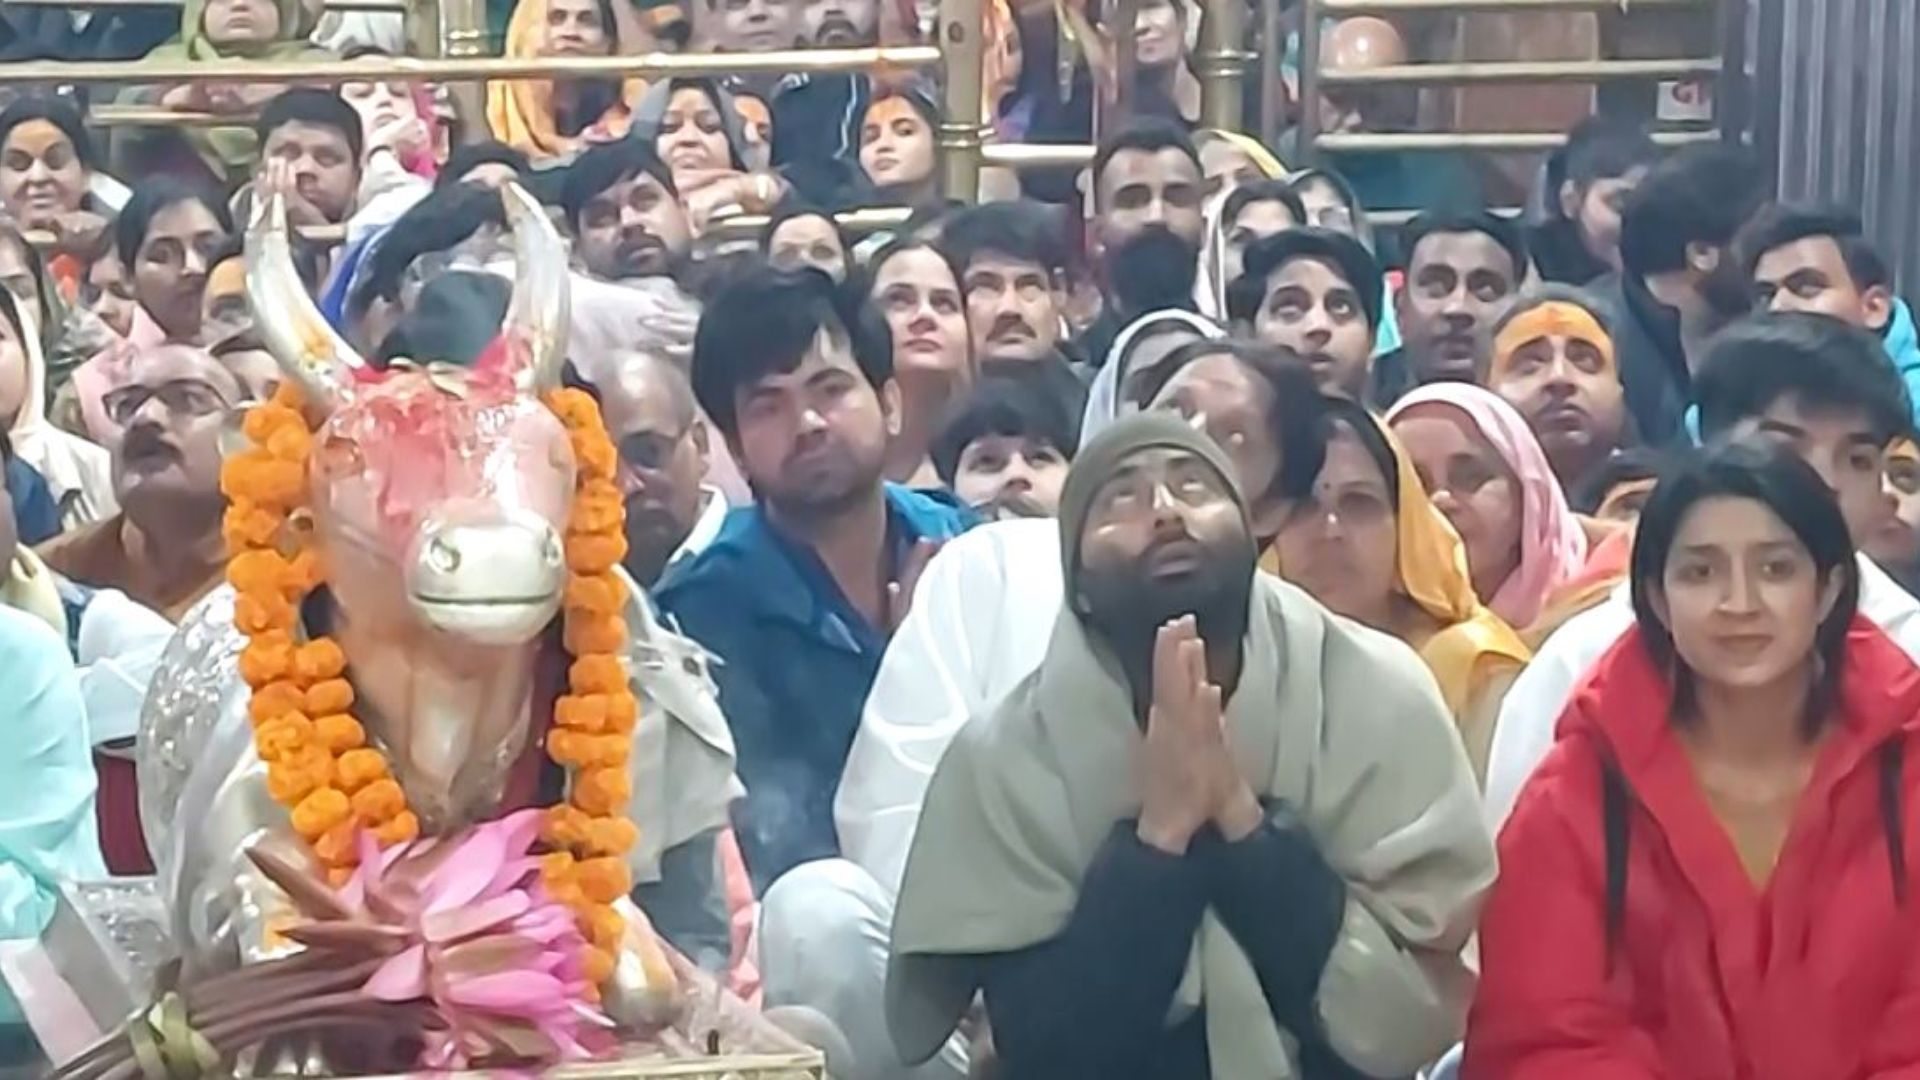 Congress candidate offers heartfelt prayers at Ujjain’s Mahakaleshwar Temple with hours left to counting